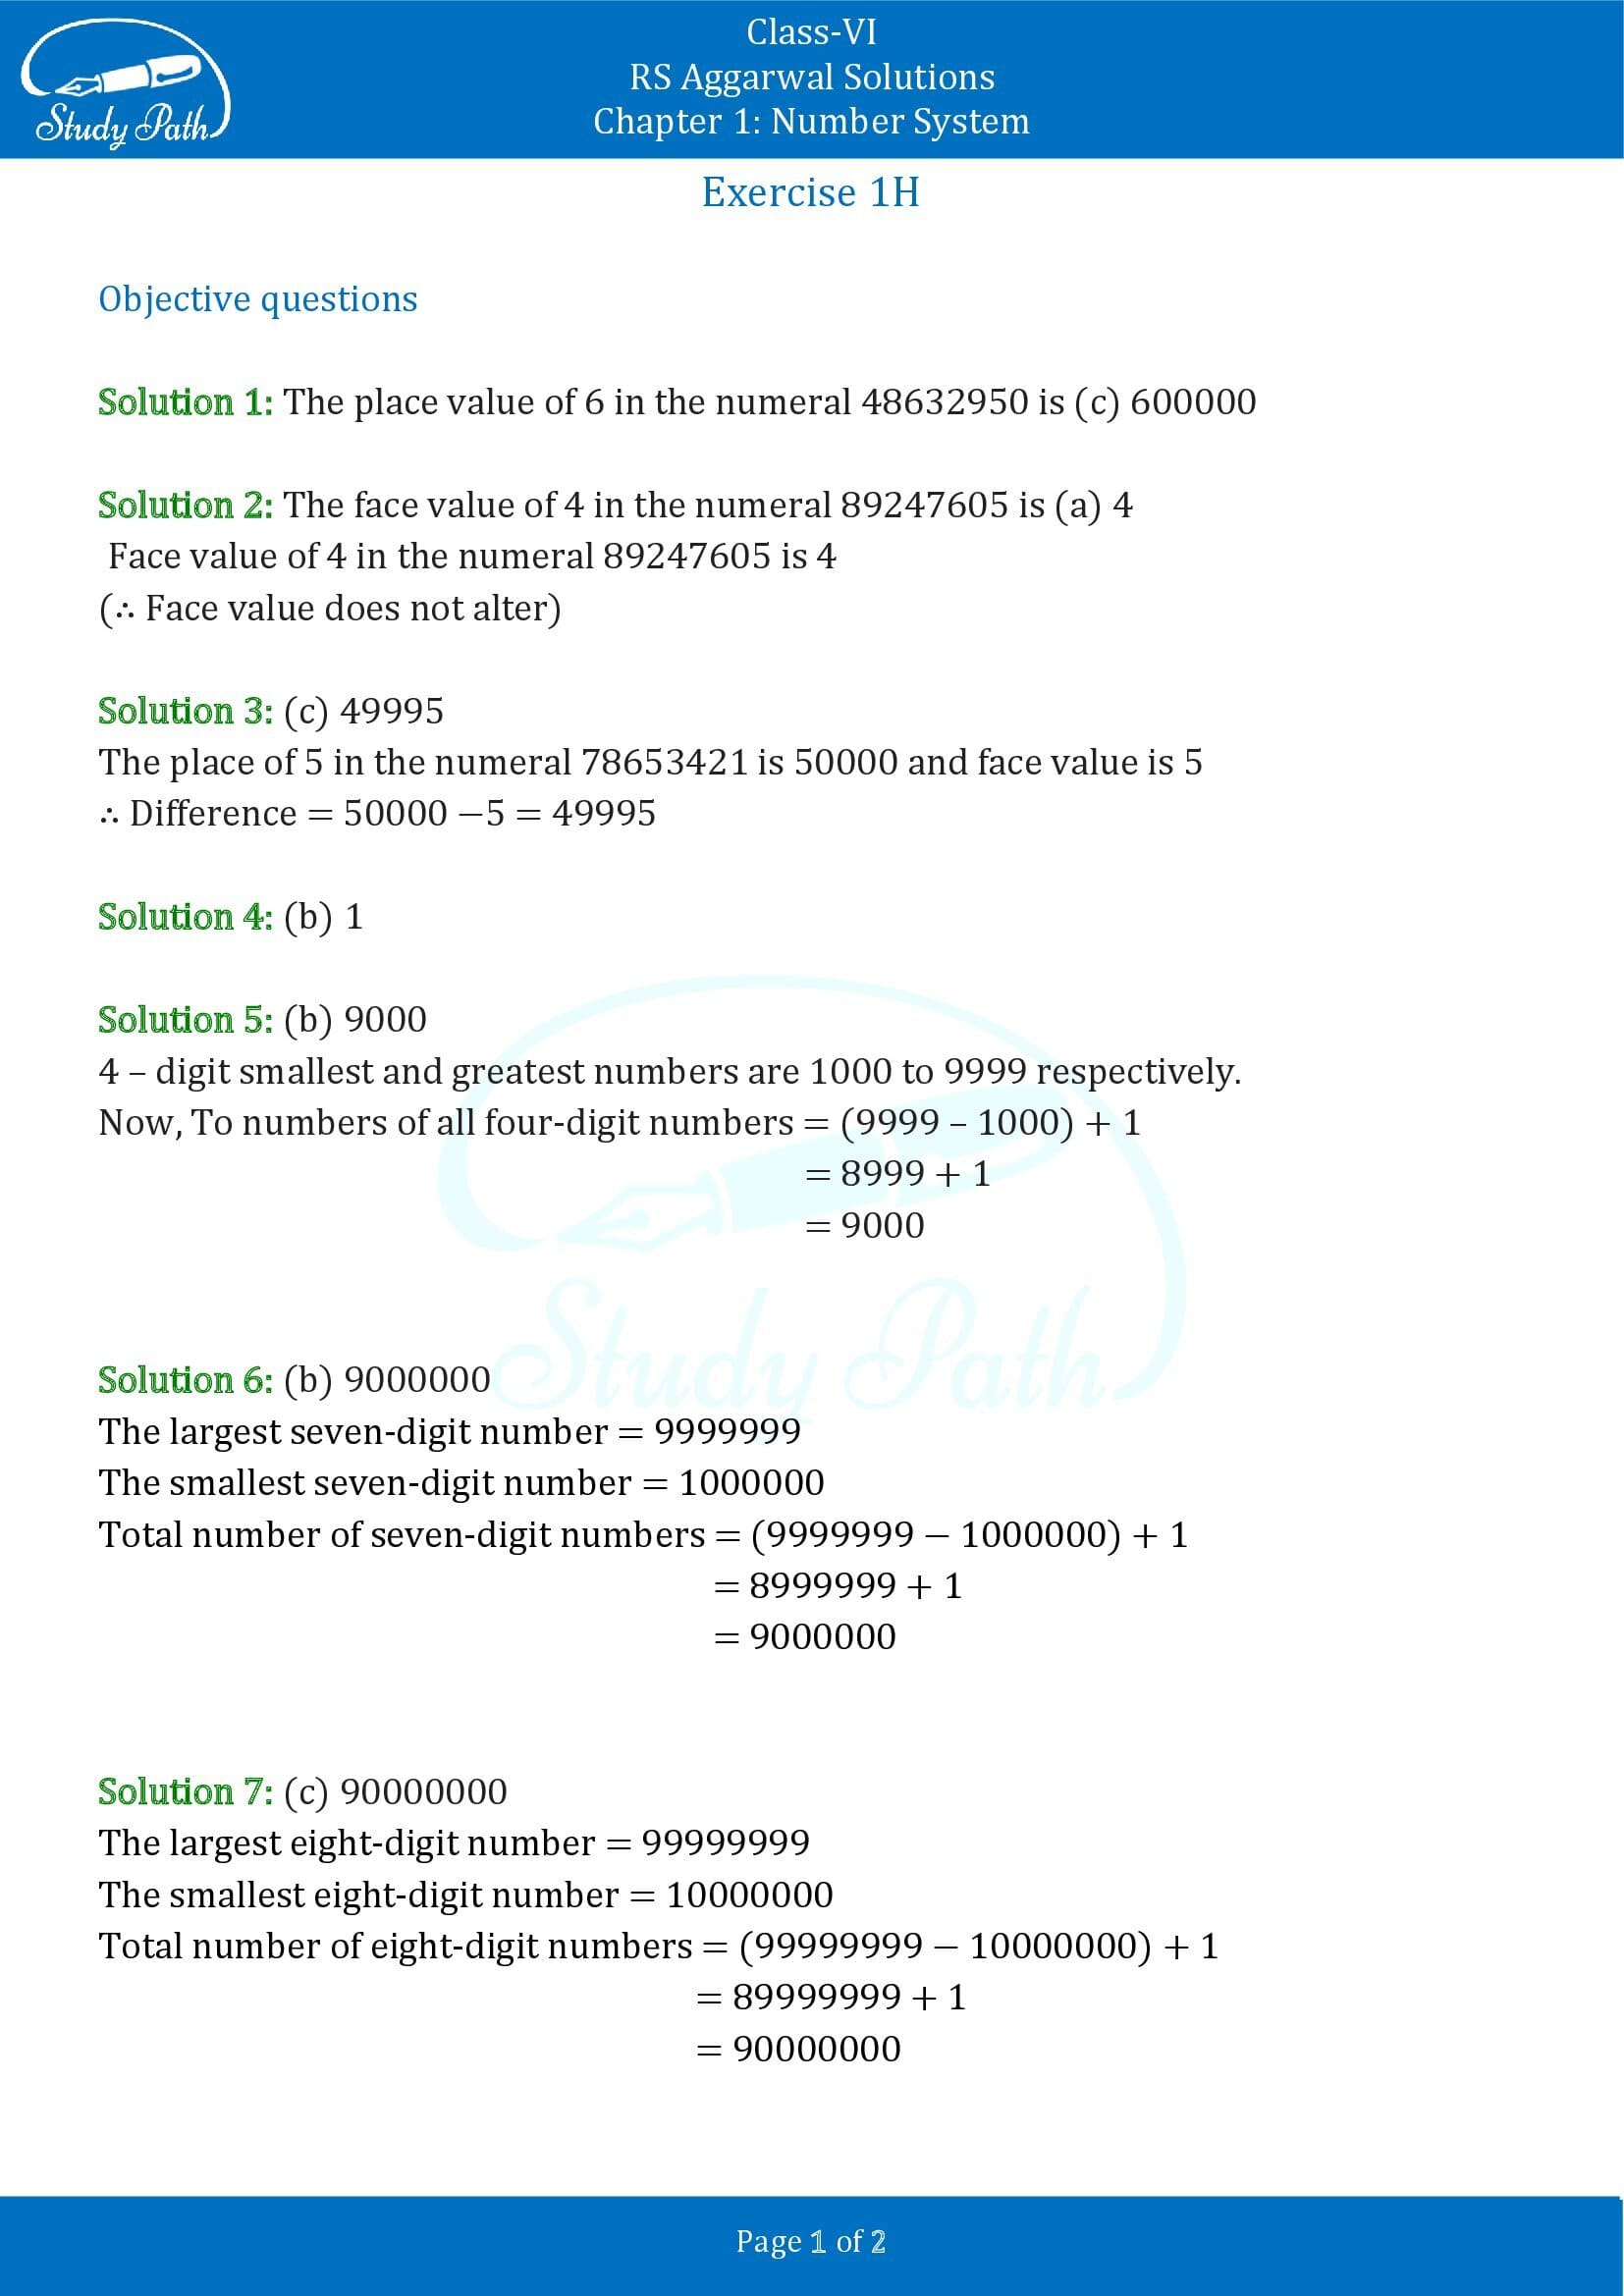 RS Aggarwal Solutions Class 6 Chapter 1 Number System Exercise 1H MCQ 00001